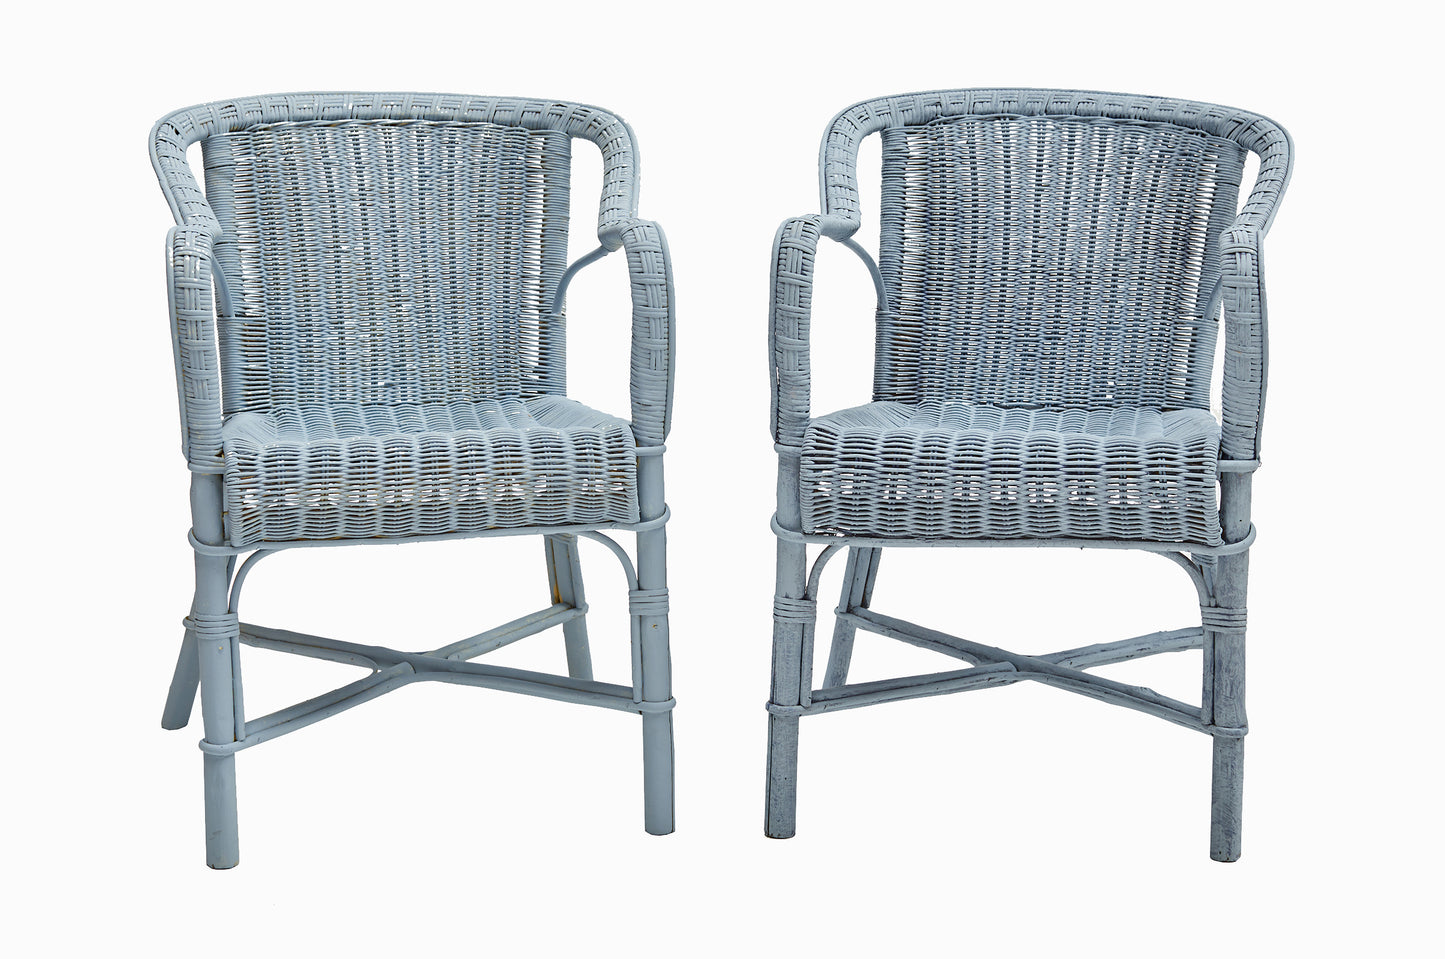 1950's Wicker Chairs